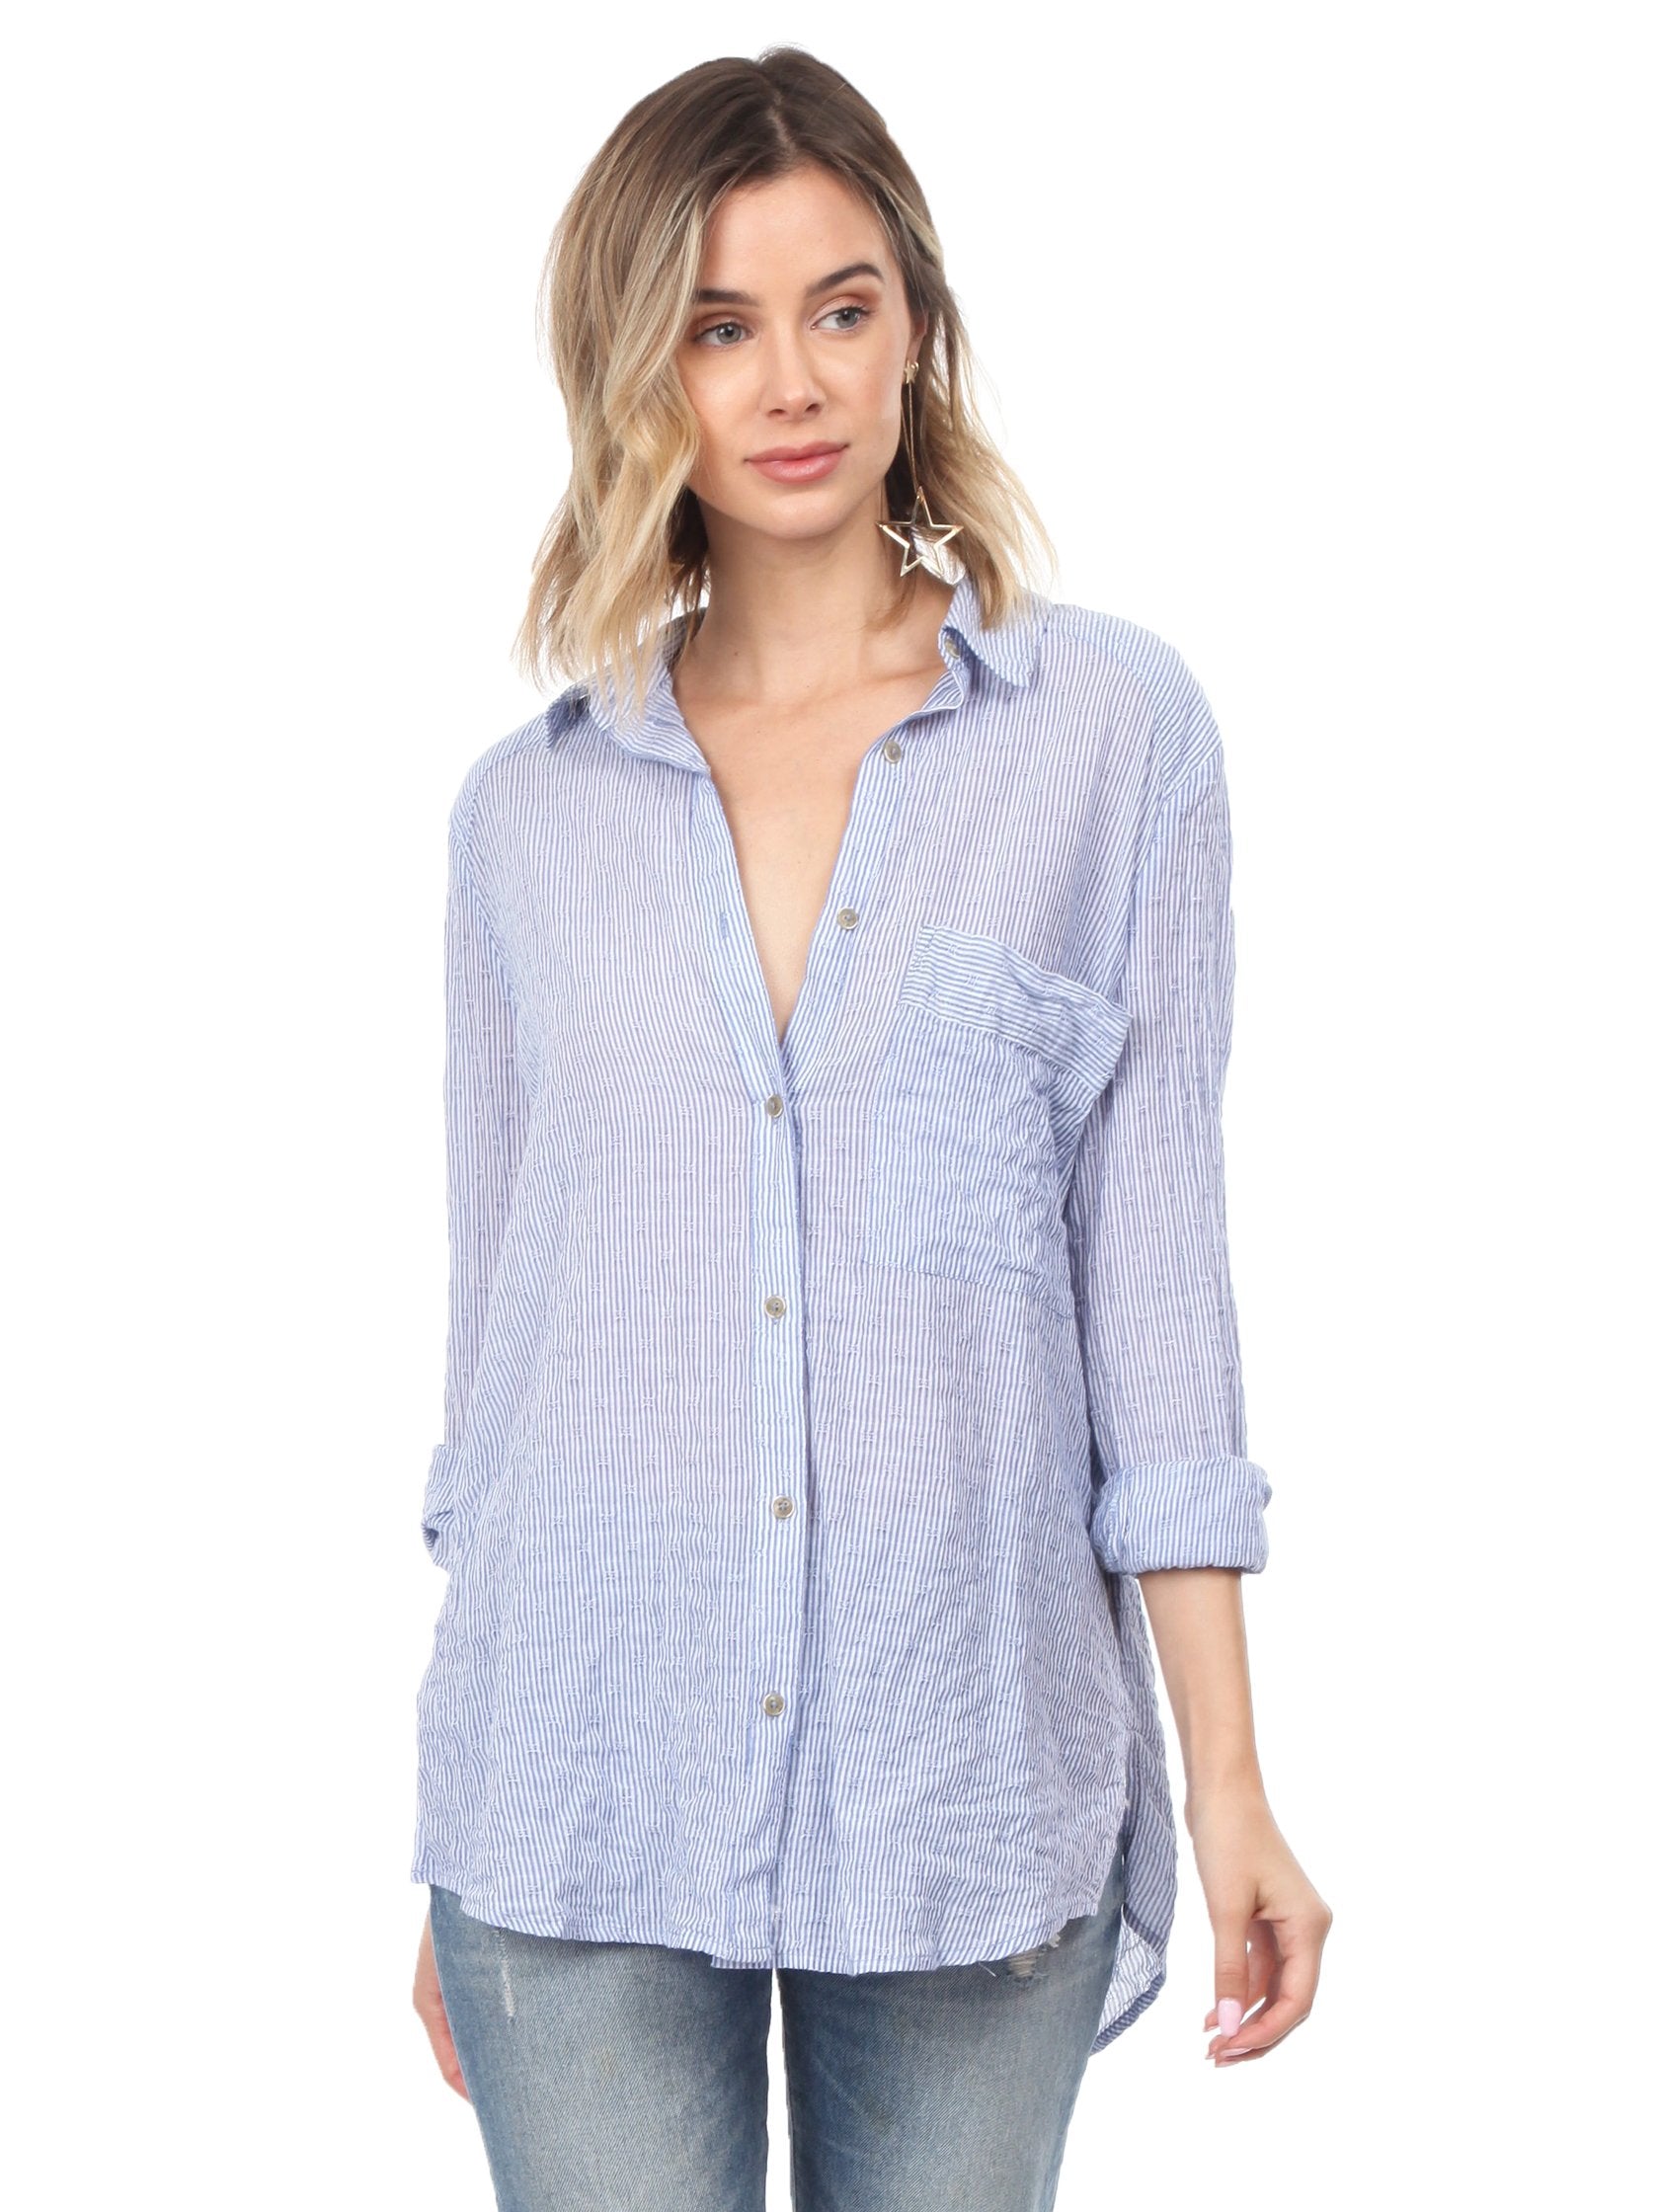 Women outfit in a top rental from Free People called No Limits Stripe Stretch Cotton Shirt